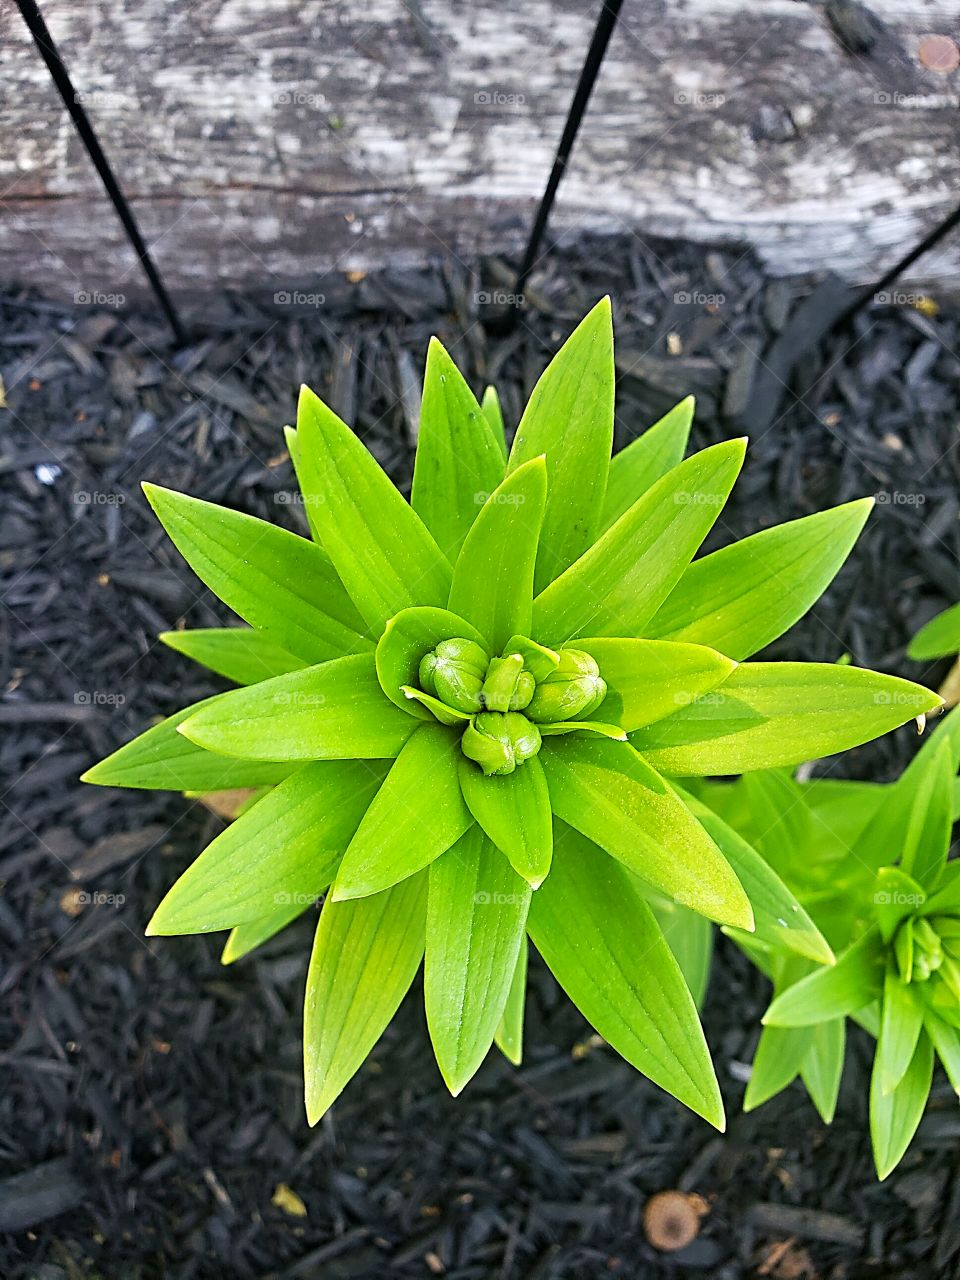 lily perennial will bloom soon